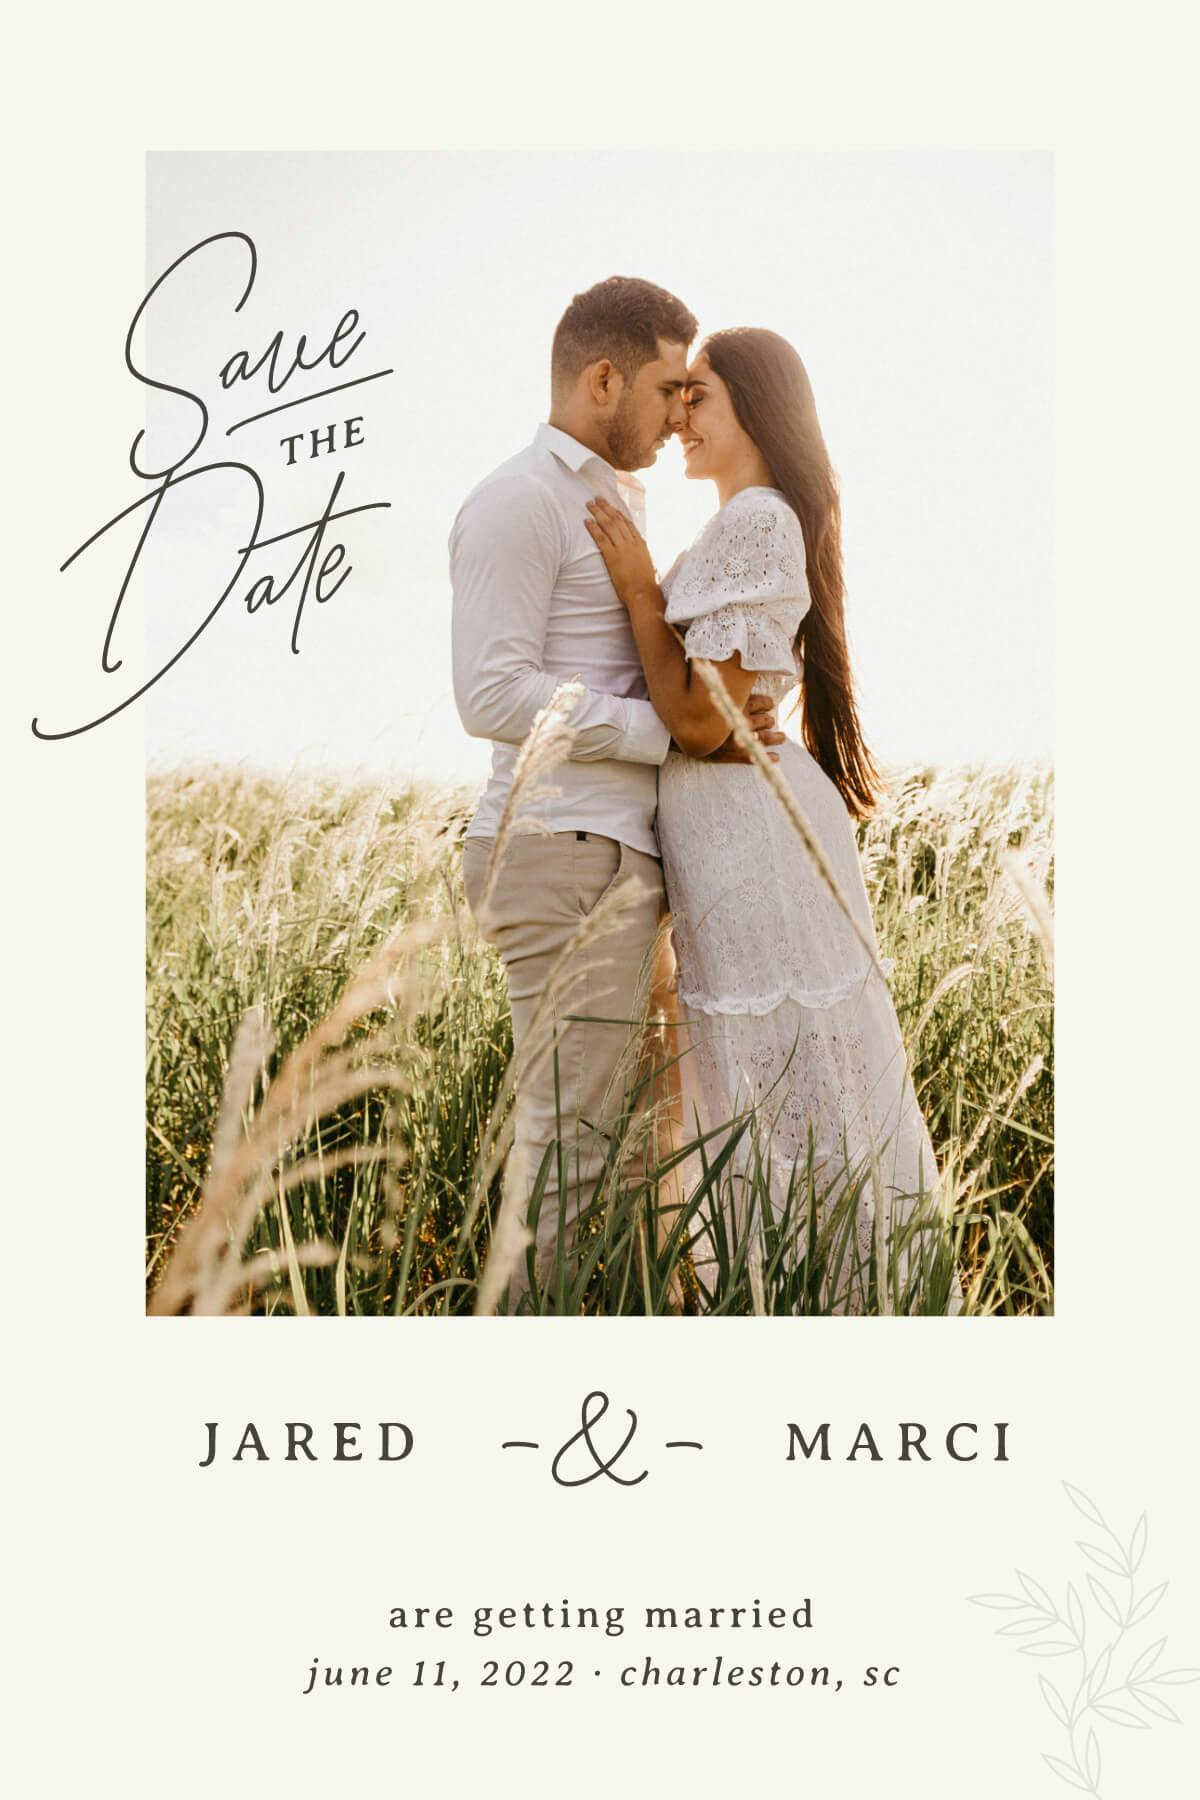 Happy couple on a modern "Save the Date" wedding invitation.